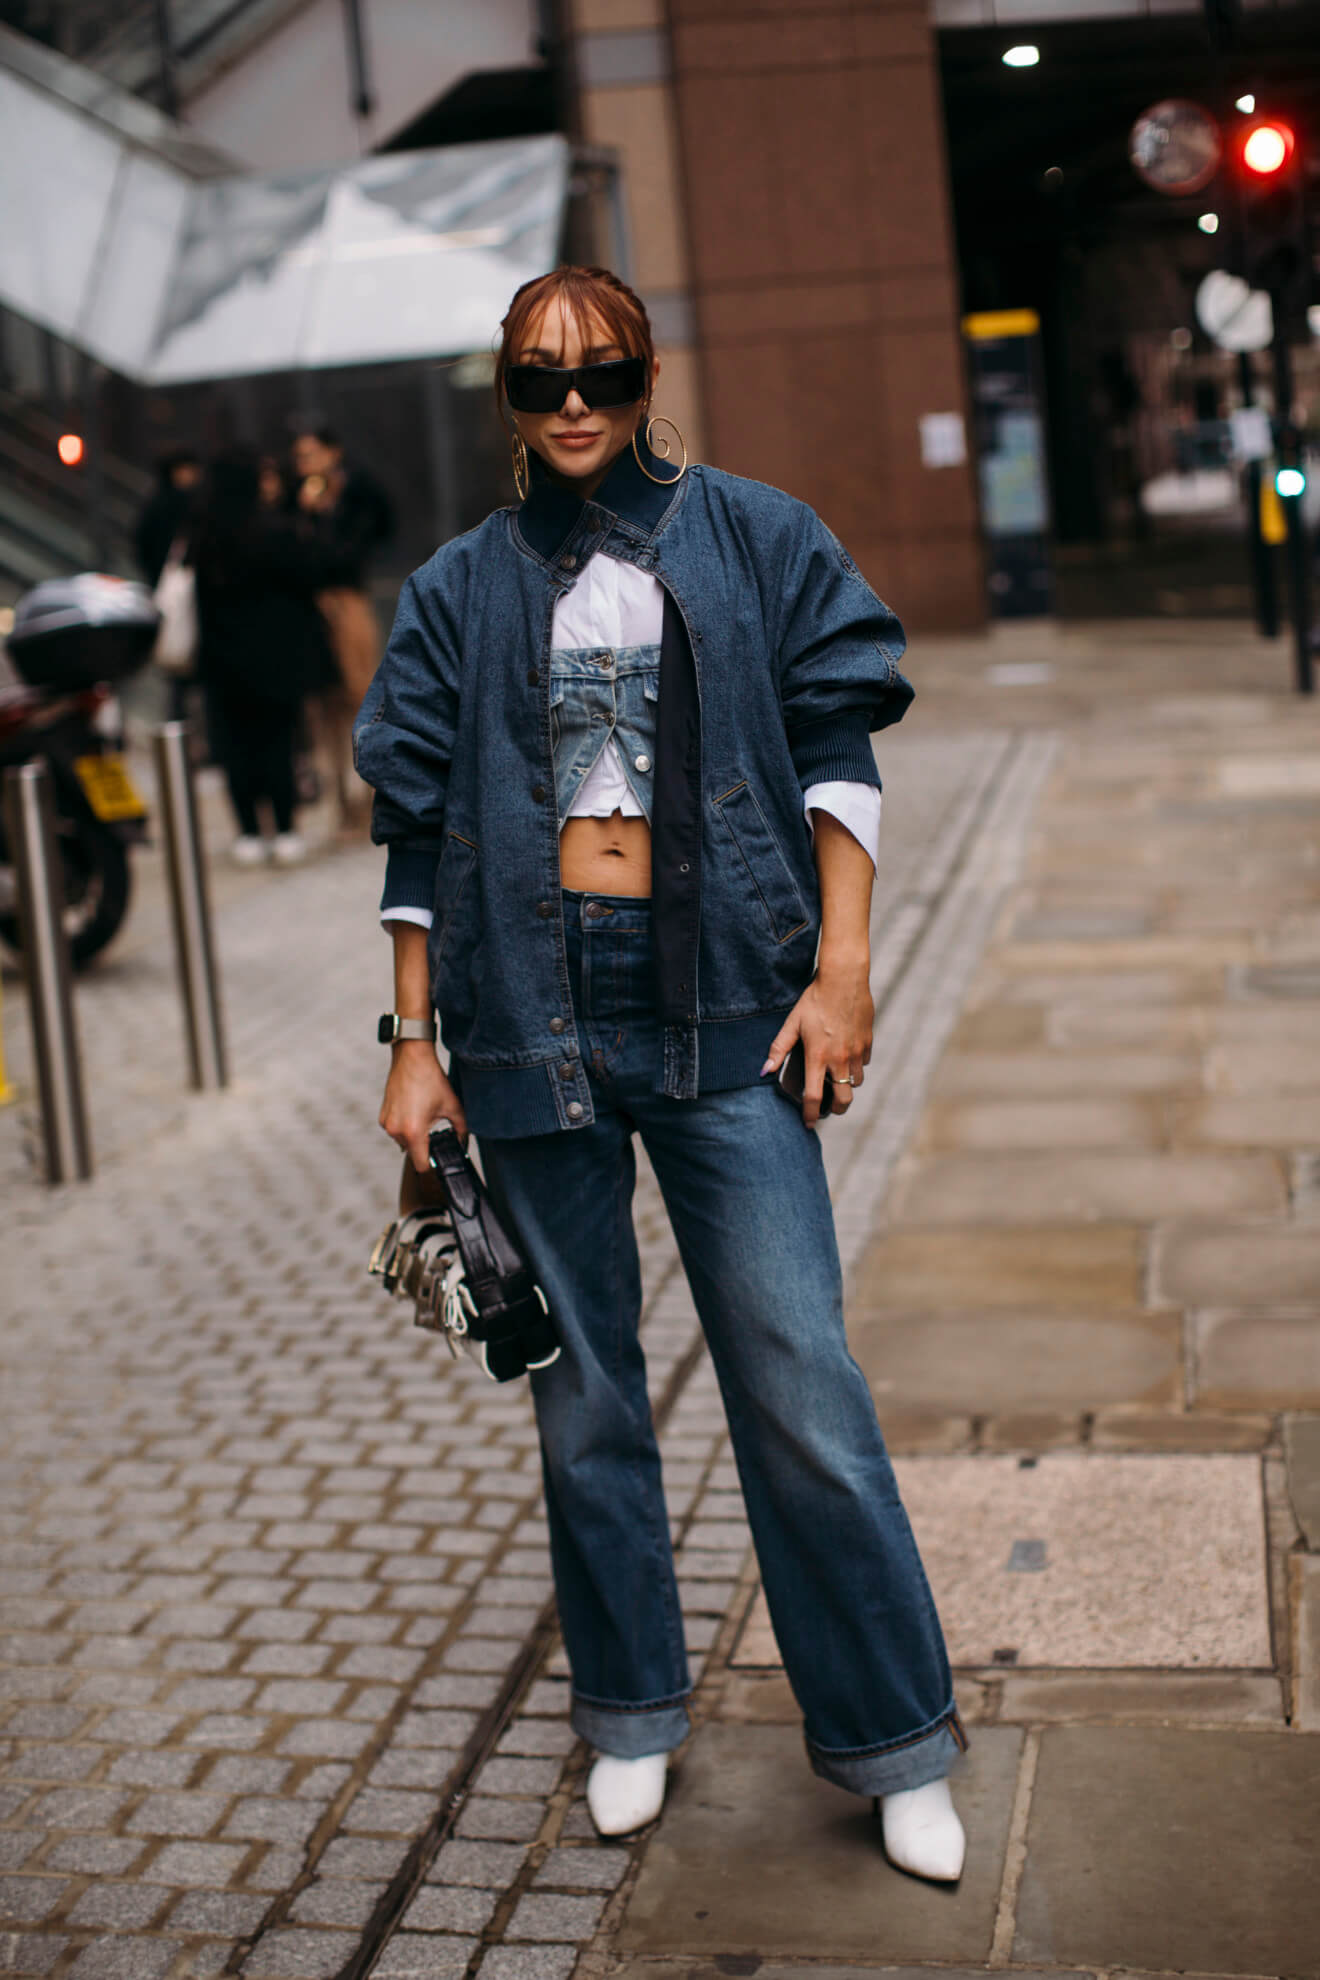 woman at fashion week wears boots with jeans